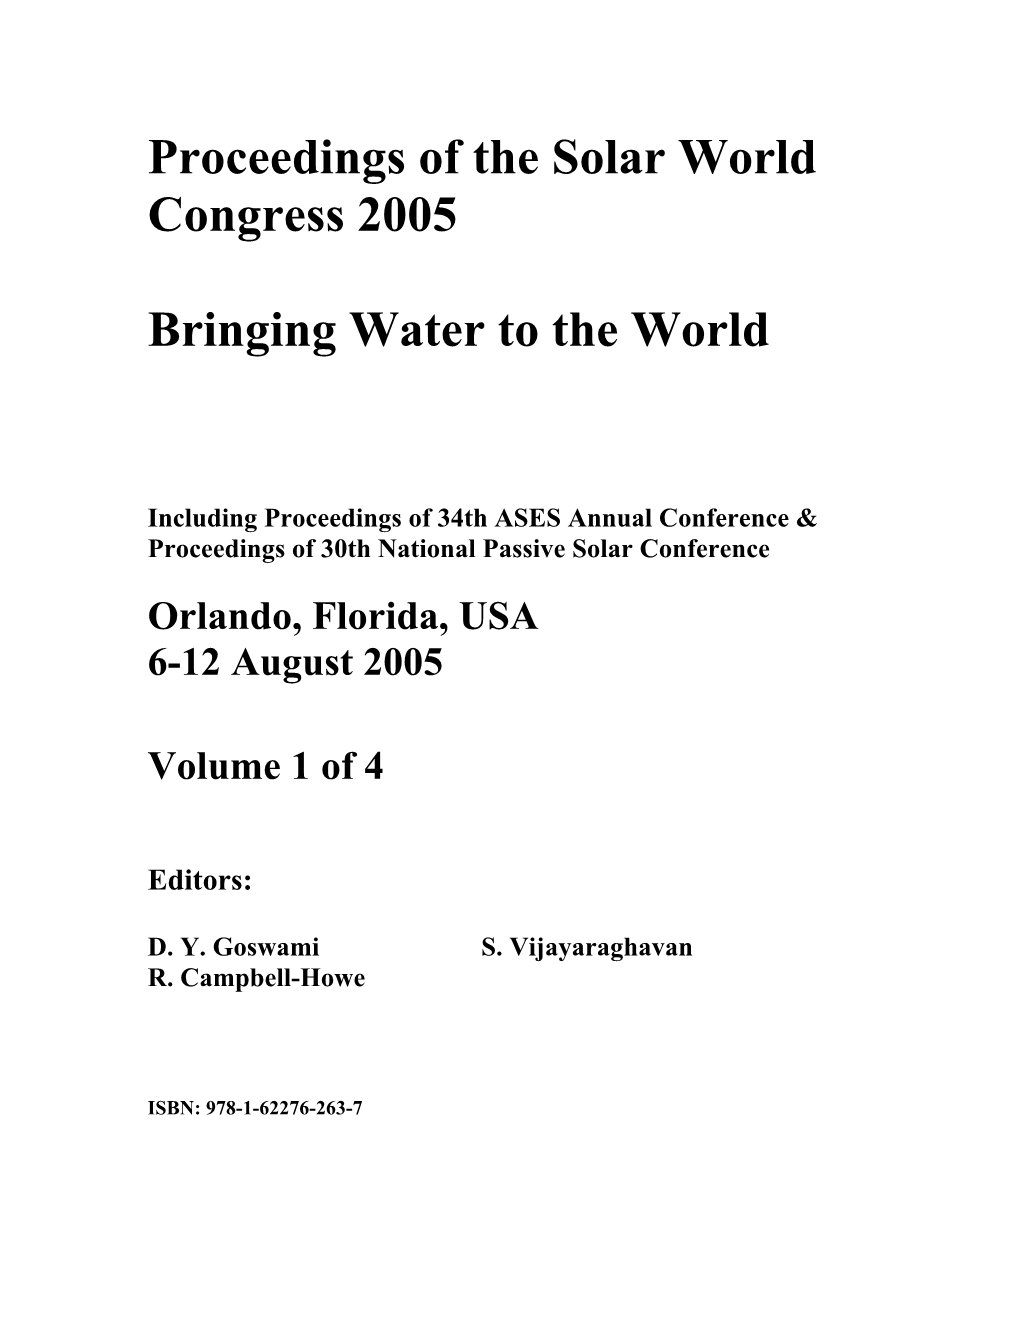 Proceedings of the Solar World Congress 2005 Bringing Water To